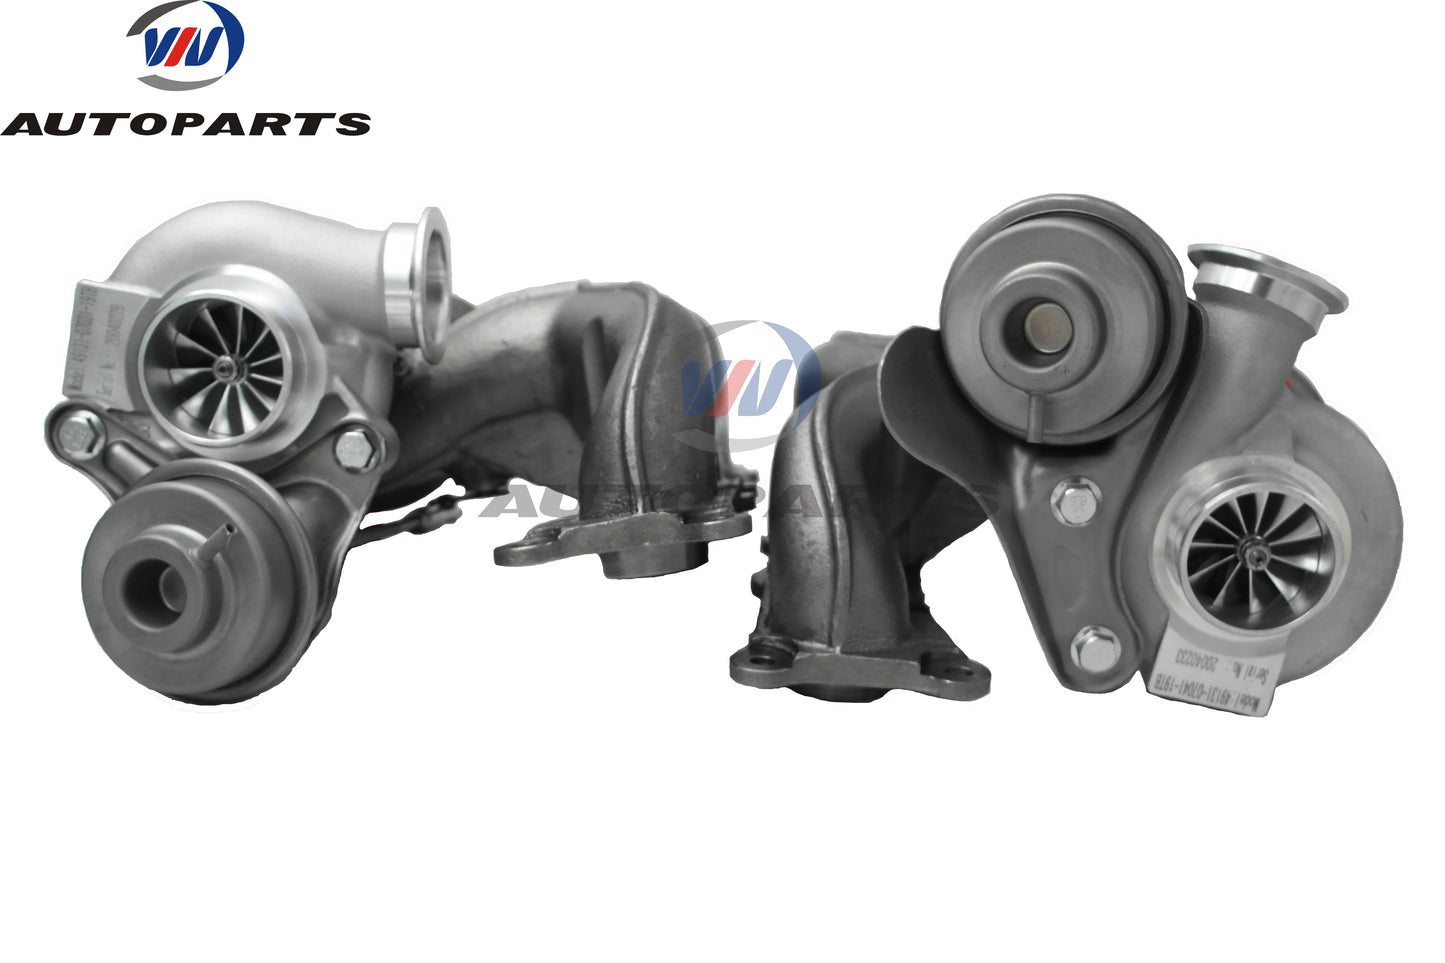 Upgraded TD04 Billet Twin Turbochargers for N54 Engine